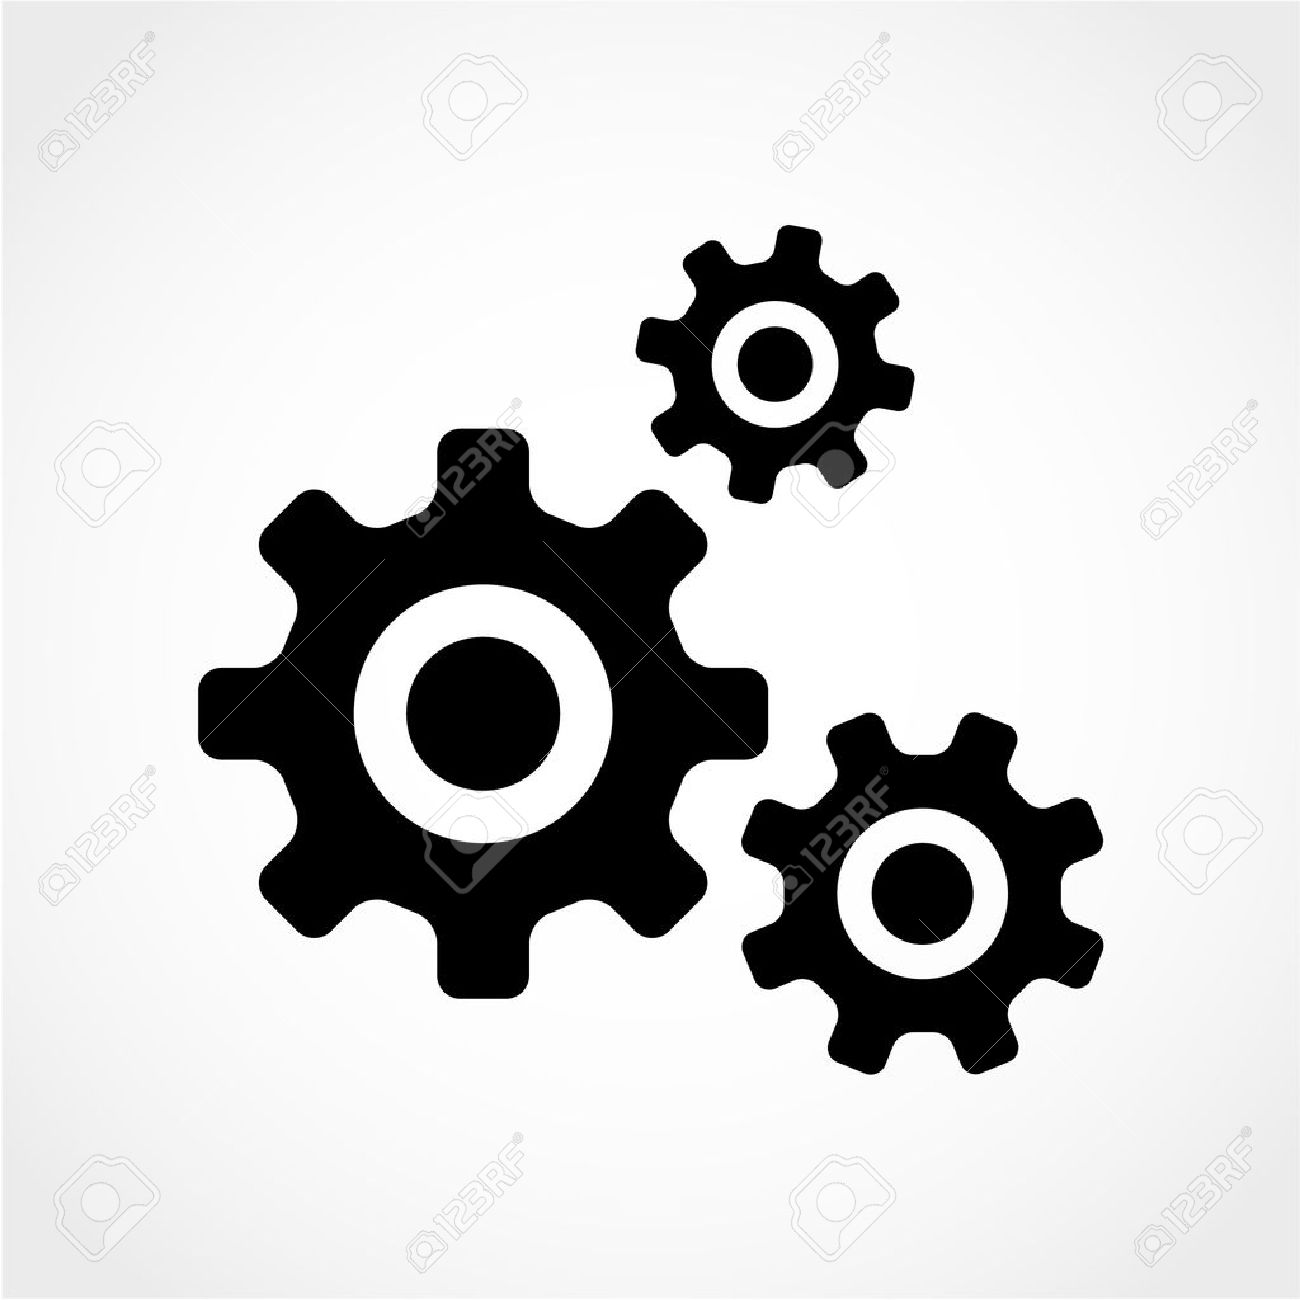 Gear icon stock vector. Illustration of power, motion - 46547606